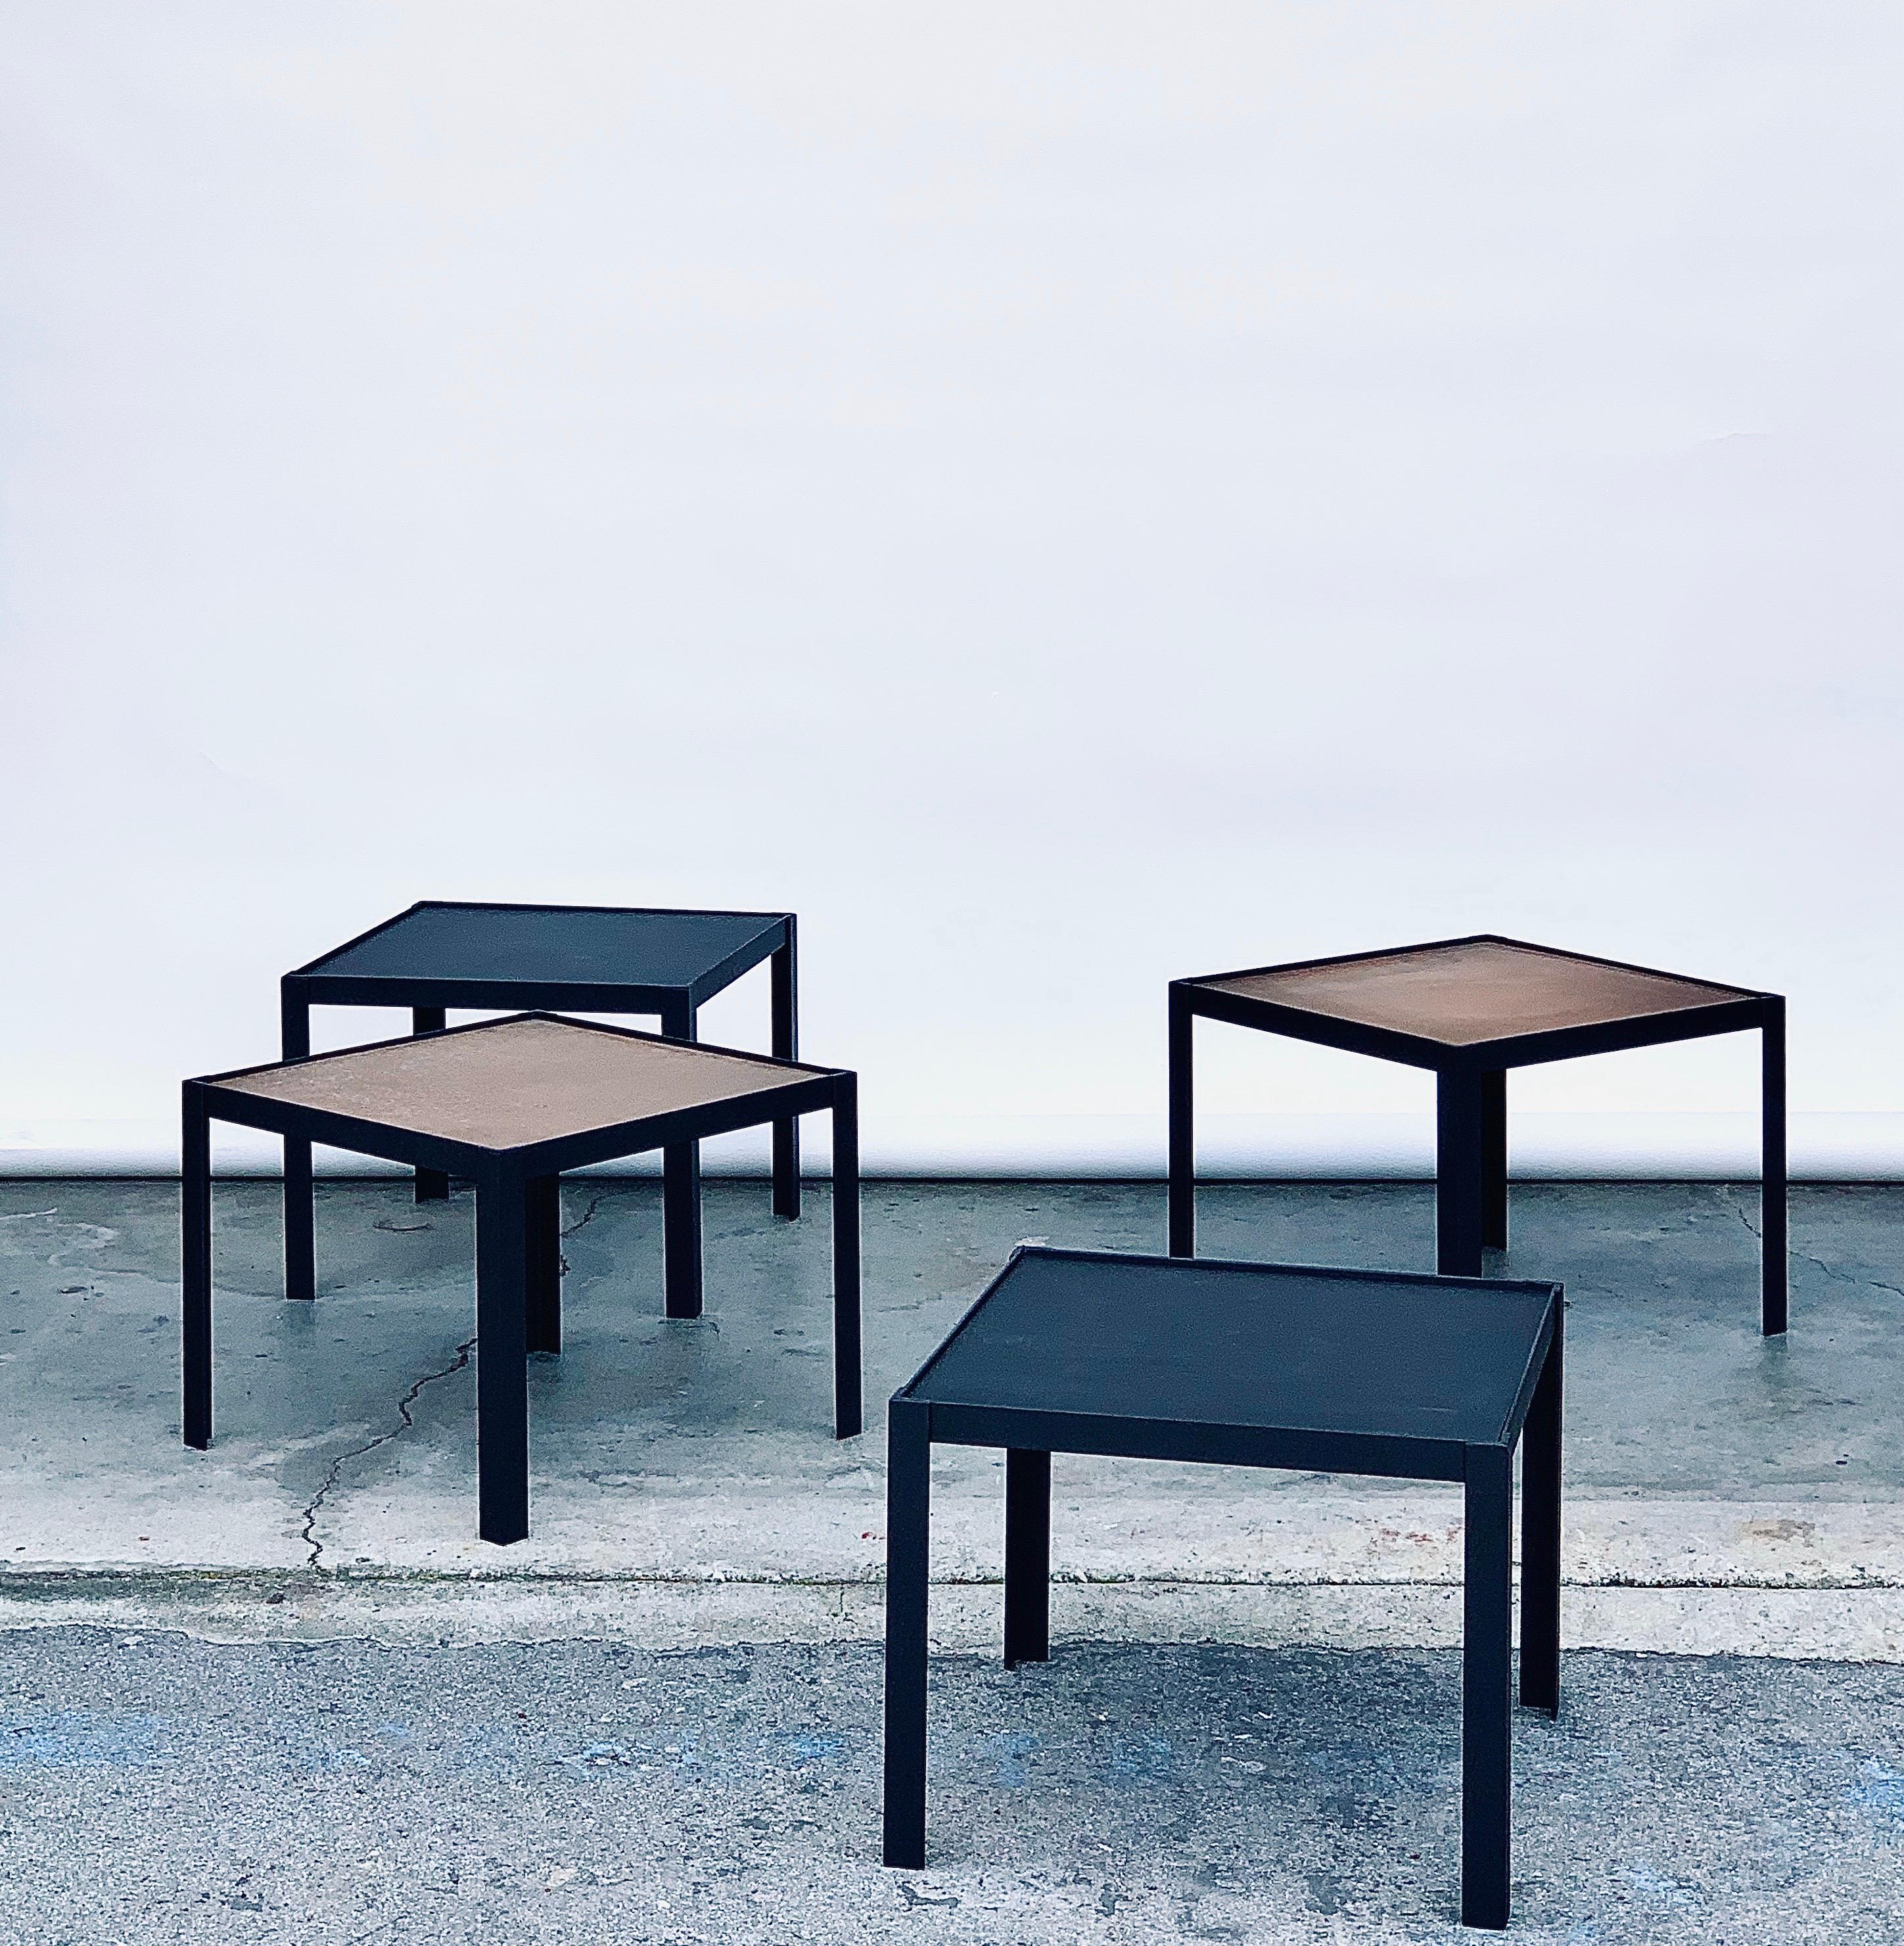 Versatile set of 4 'Pion' black leather and patinated brass reversible occasional tables by Design Frères.

Tops are interchangeable between thick matte black leather cutouts and the patinated unlacquered brass panes.

Only sold as a set.